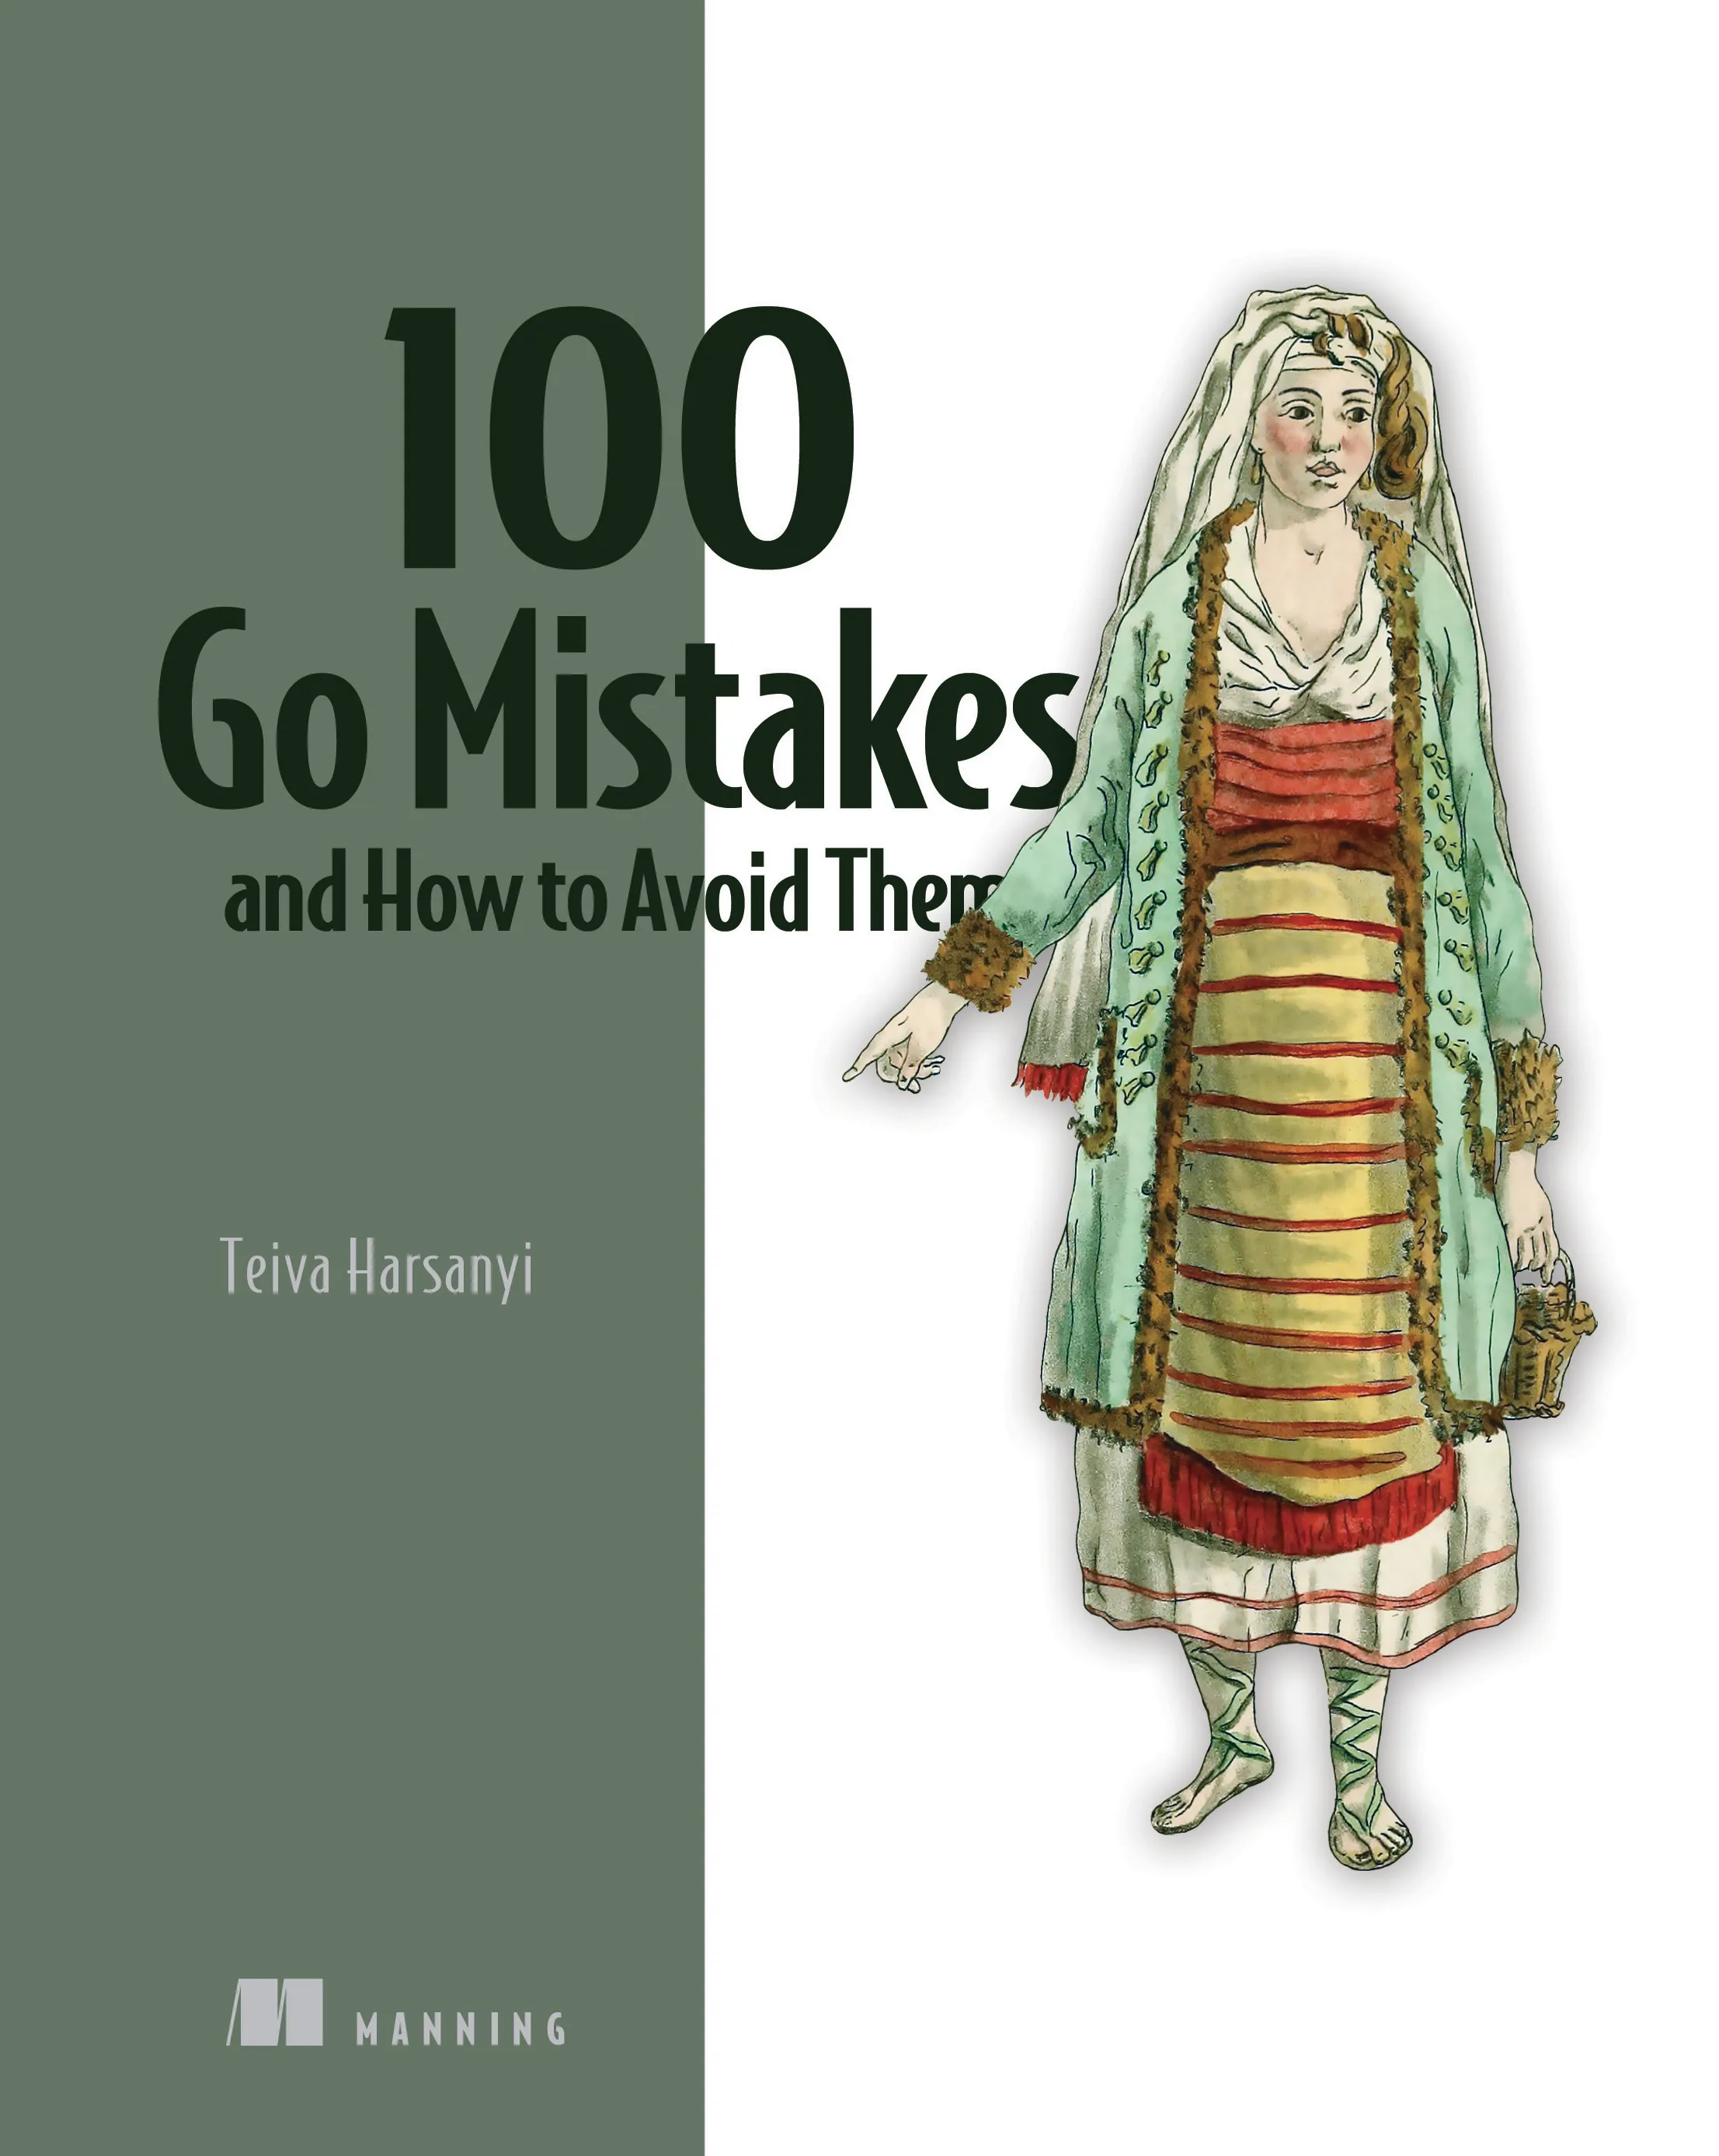 The cover of 100 Go Mistakes and How to Avoid Them, a book by Teiva Harsanyi